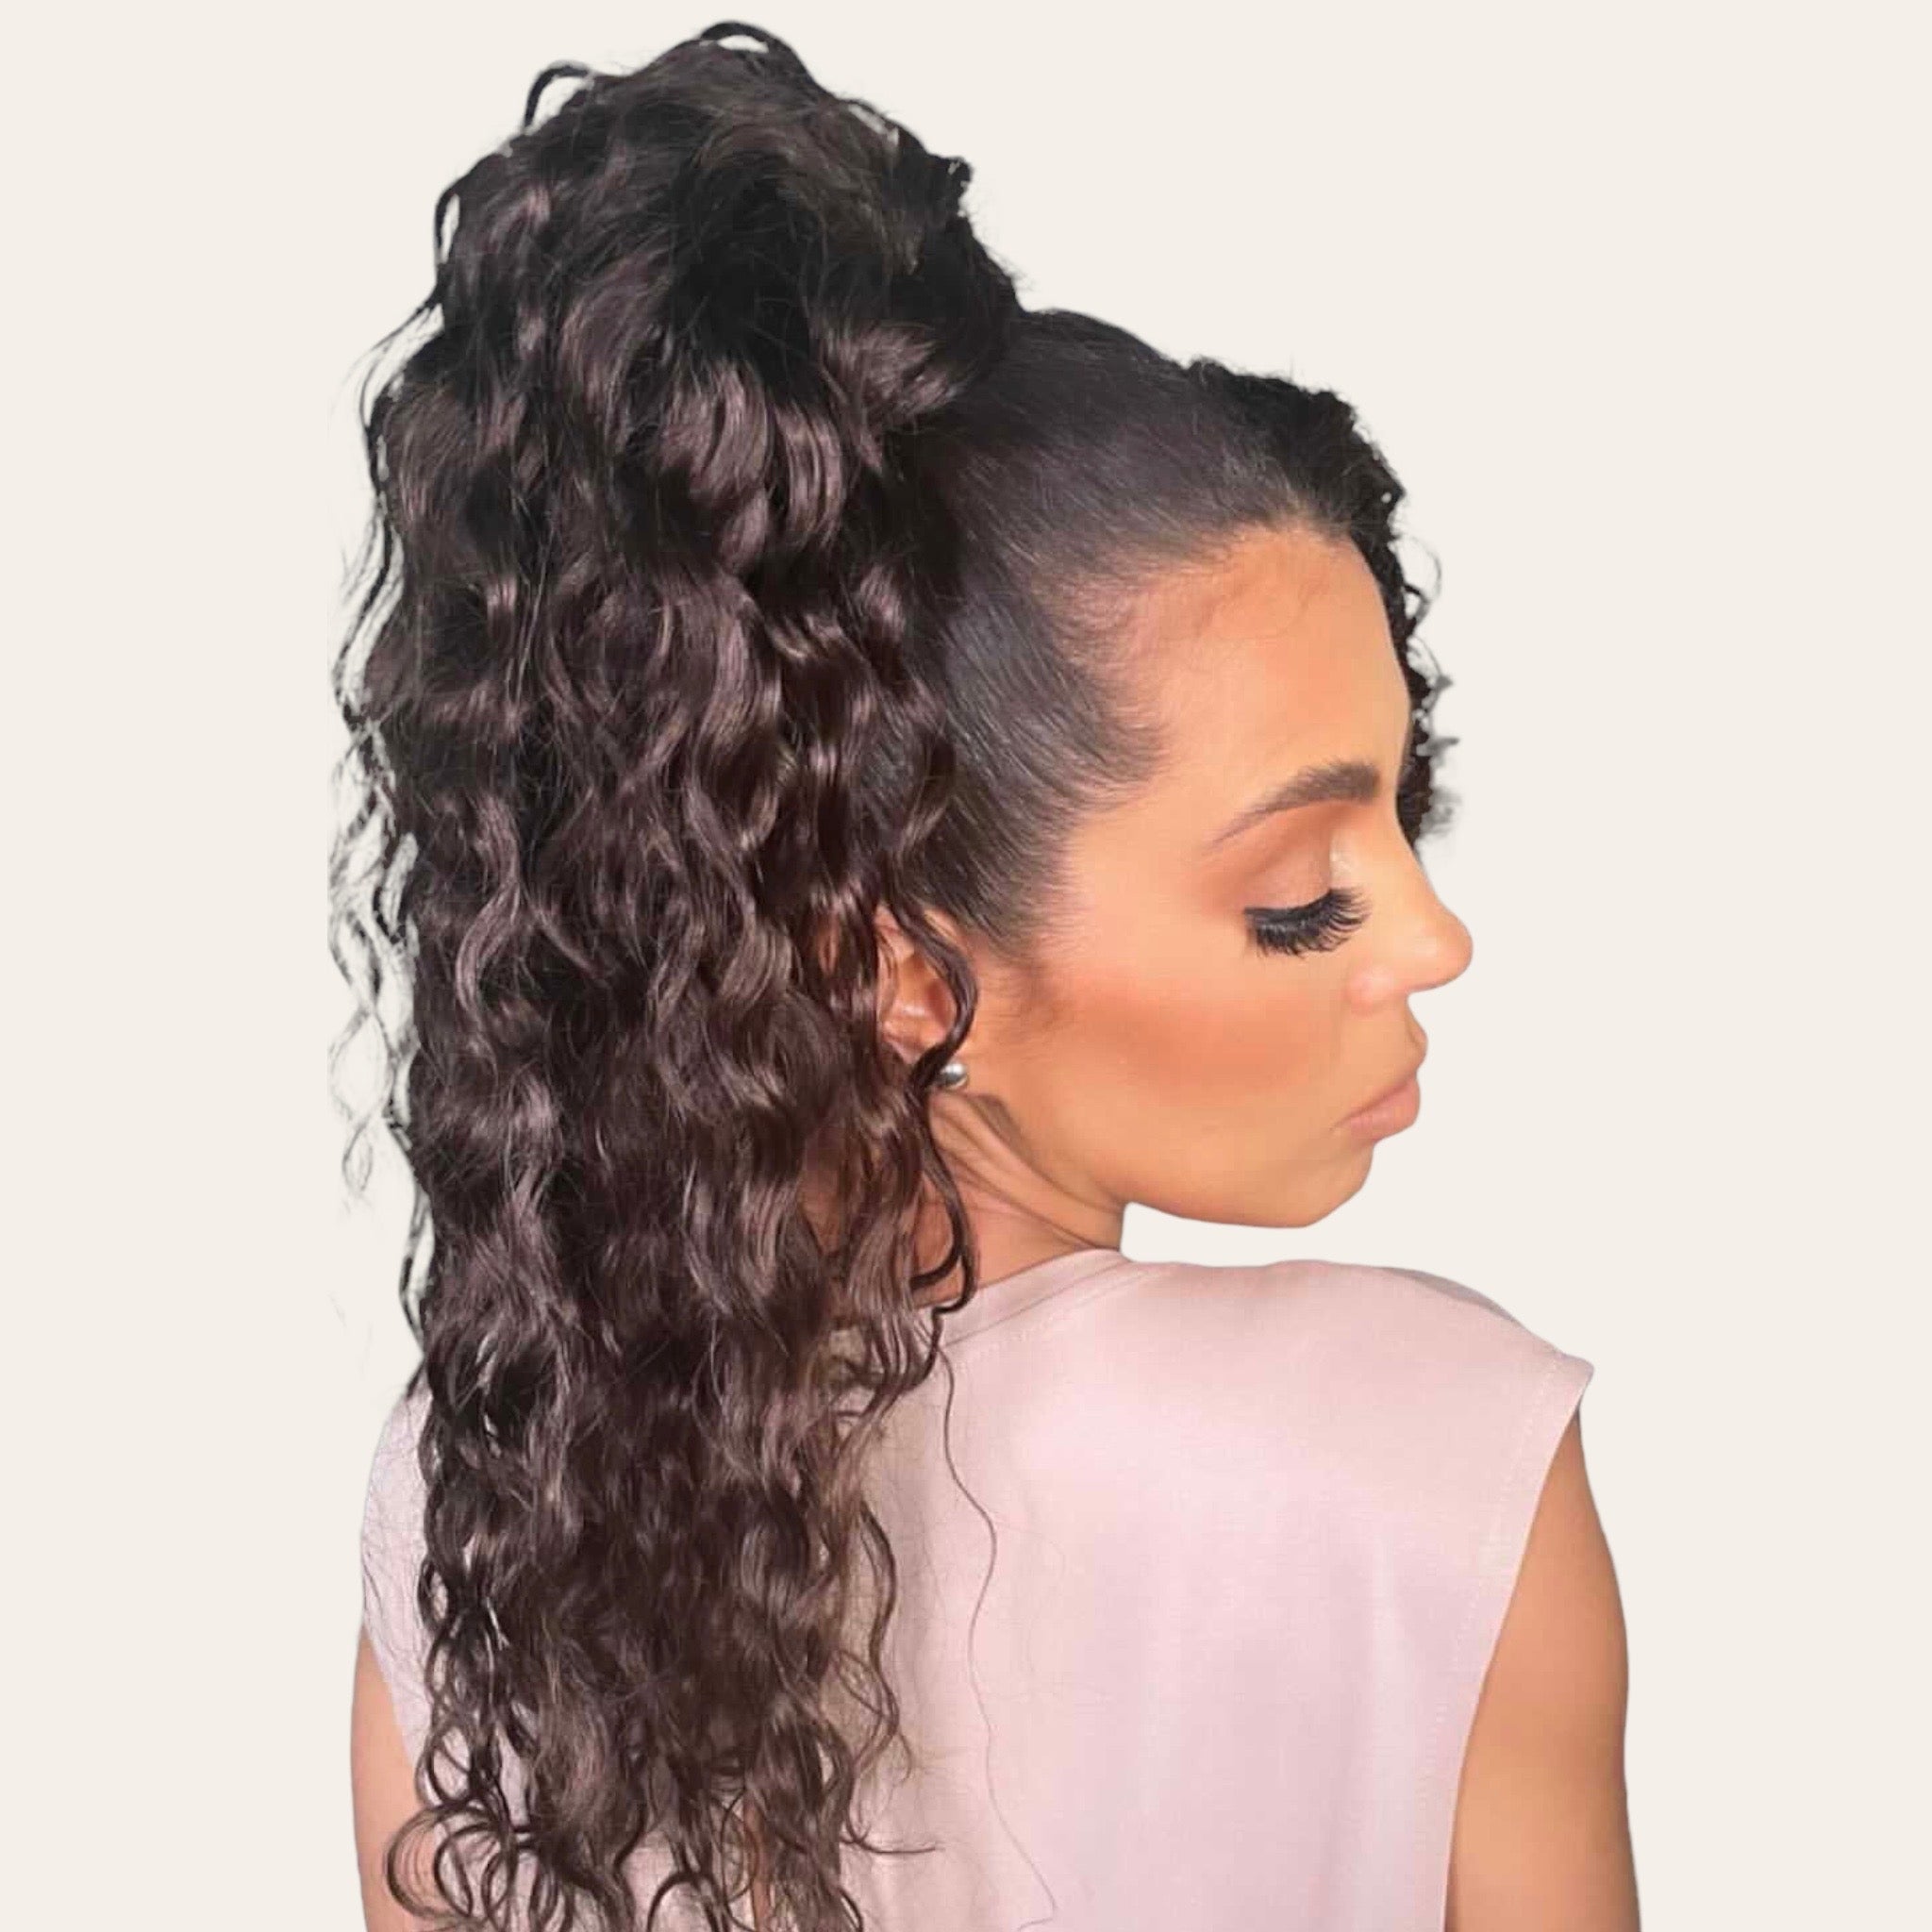 Curly Ponytail Human Hair Extensions #60a Silver Blonde